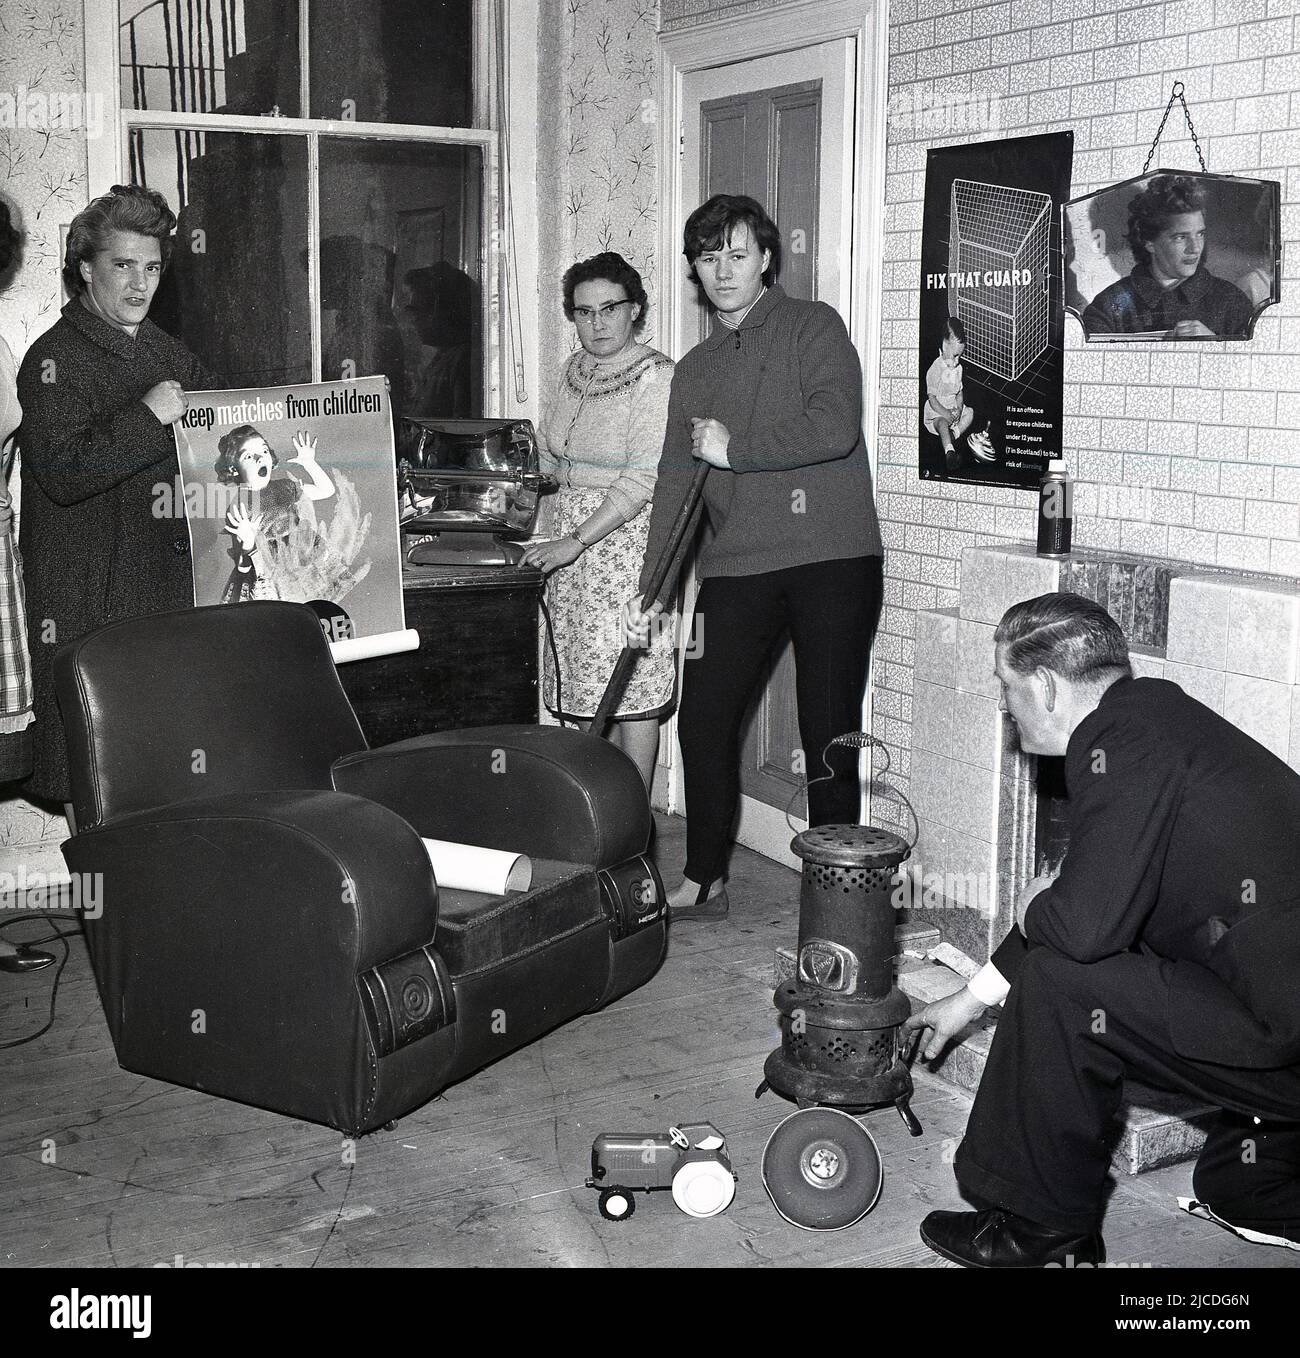 1960s, historical, fire safety education campaign, inside a room, a woman holding an electric fire and a man kneeling down by a small stove, in a picture to highlight fire prevention in the home. A lady is holding a poster warning about the danger of matches..'keep matches away from children', while another poster is on the wall highlighting the importance of fire guards...'  fix that (fire) guard', Fife, Scotland, UK. Stock Photo